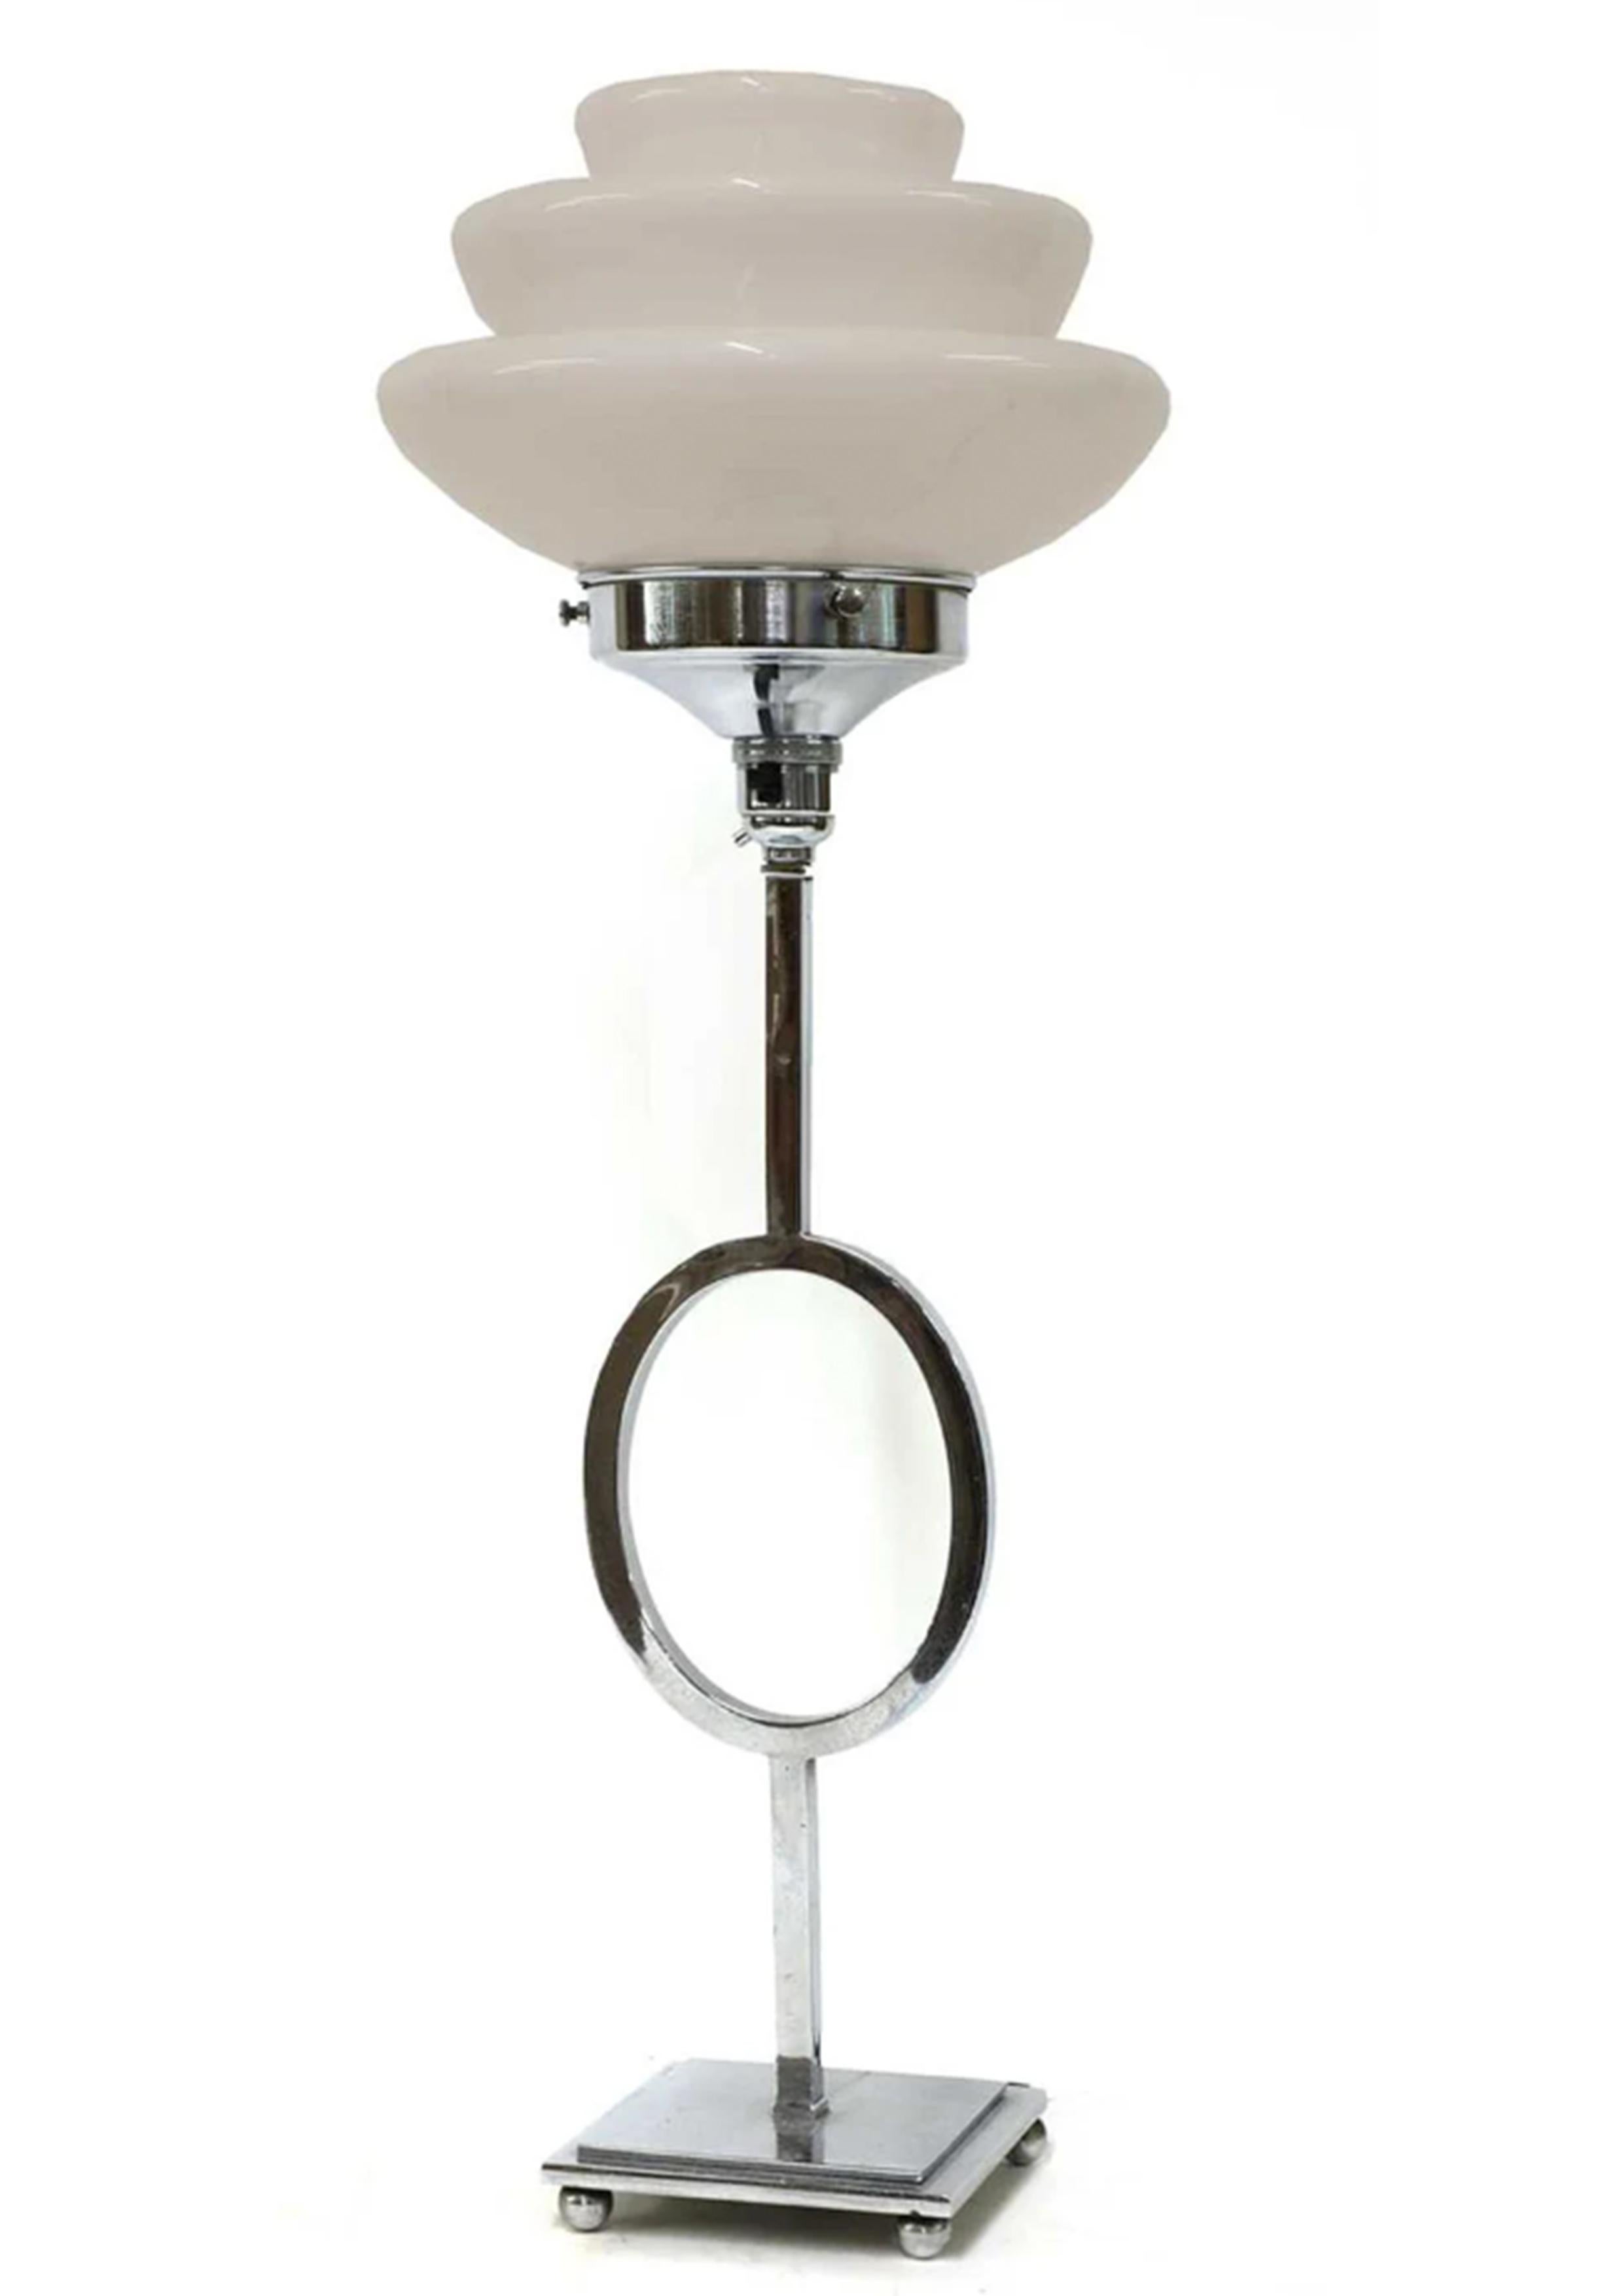 Art Deco Chrome And Milky Opaline Tiered Table Lamp 1920's, with a Central Hoop To The Column, Nickel Plated Base.

Provenance: The Lawrie Gatehouse Collection, a collector of fine Art Deco furniture and interior decor

- Wonderful Art Deco